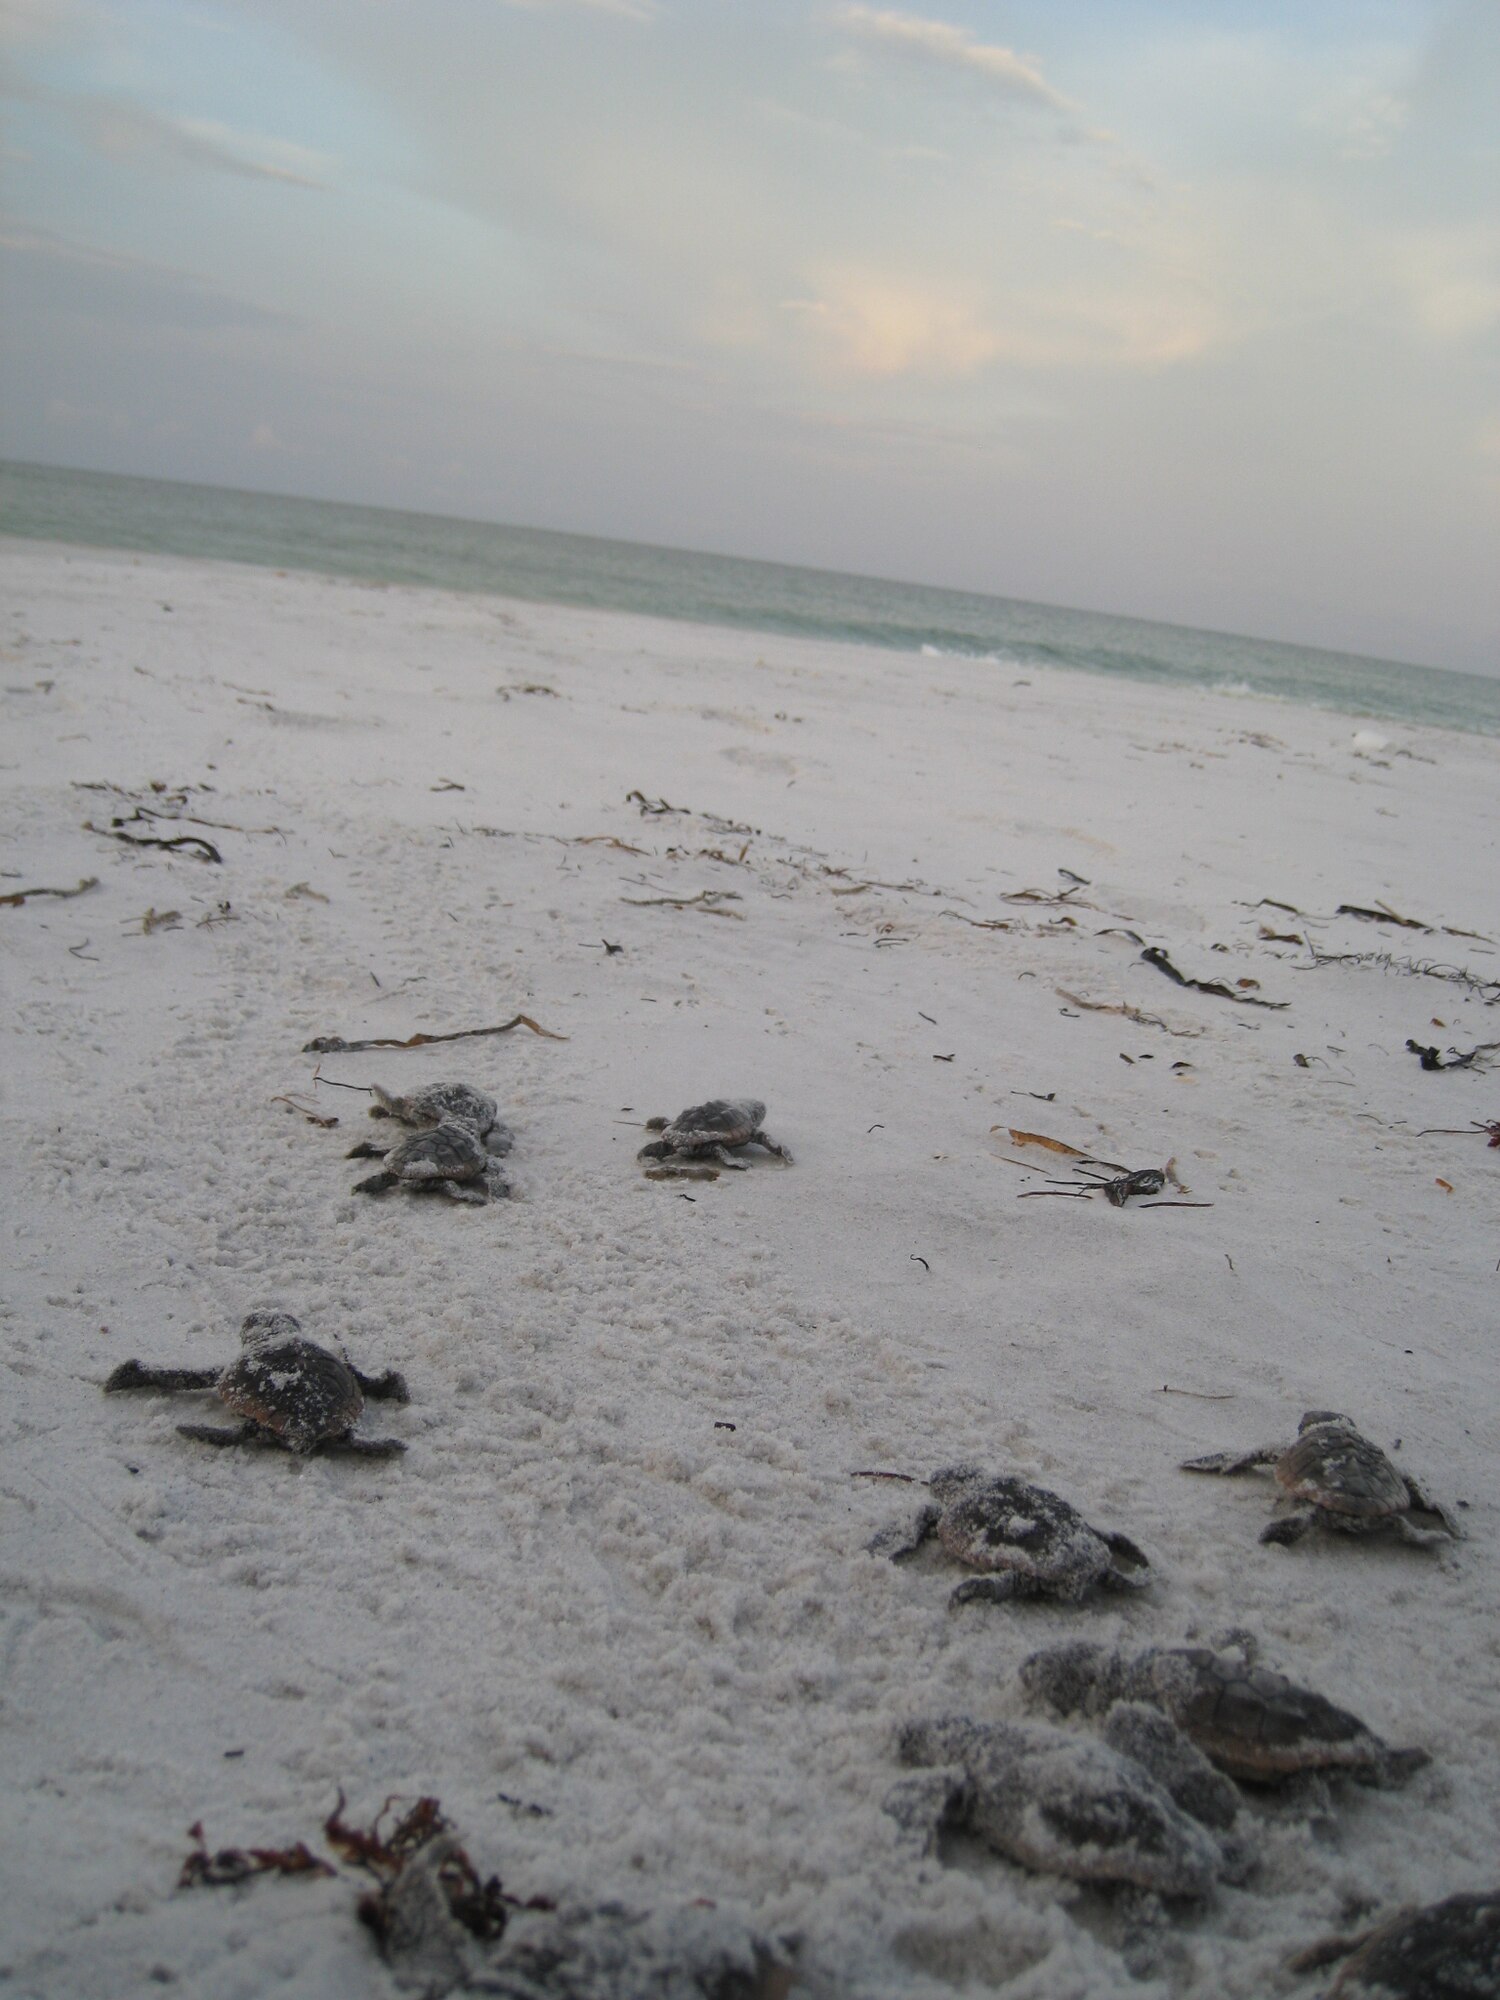 A sea turtle nest hatched Aug. 8 on Tyndall Air Force Base beach. The nests take 50 plus days to hatch after being laid and are closely monitored by Natural Resources. (Photo courtesy of 325th Civil Enigineer Squadron/ Natural Resources)